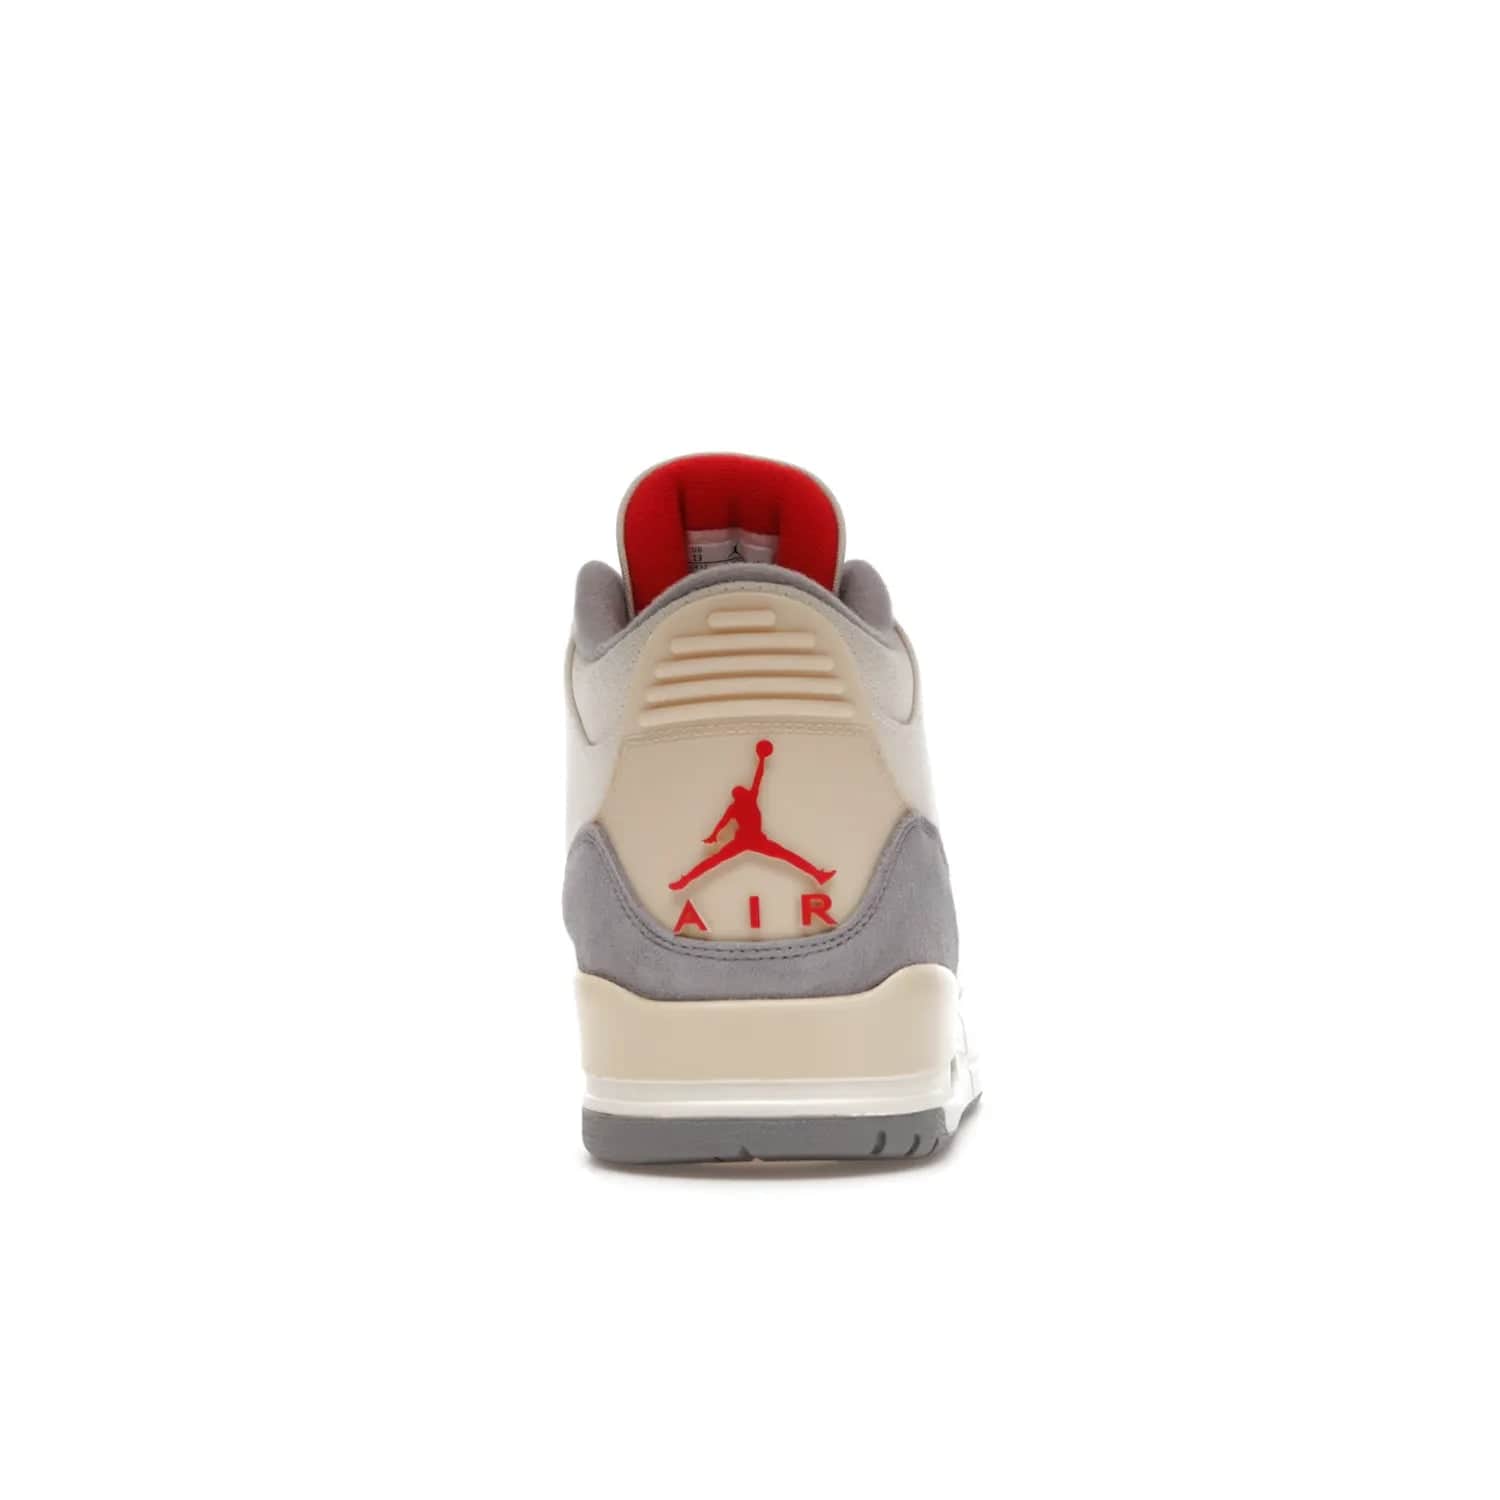 Jordan 3 Retro Muslin - Image 28 - Only at www.BallersClubKickz.com - Eye-catching Air Jordan 3 Retro Muslin in a neutral palette of grey, cream, and red. Featuring canvas upper, suede overlays and white/grey Air Max sole. Available in March 2022.